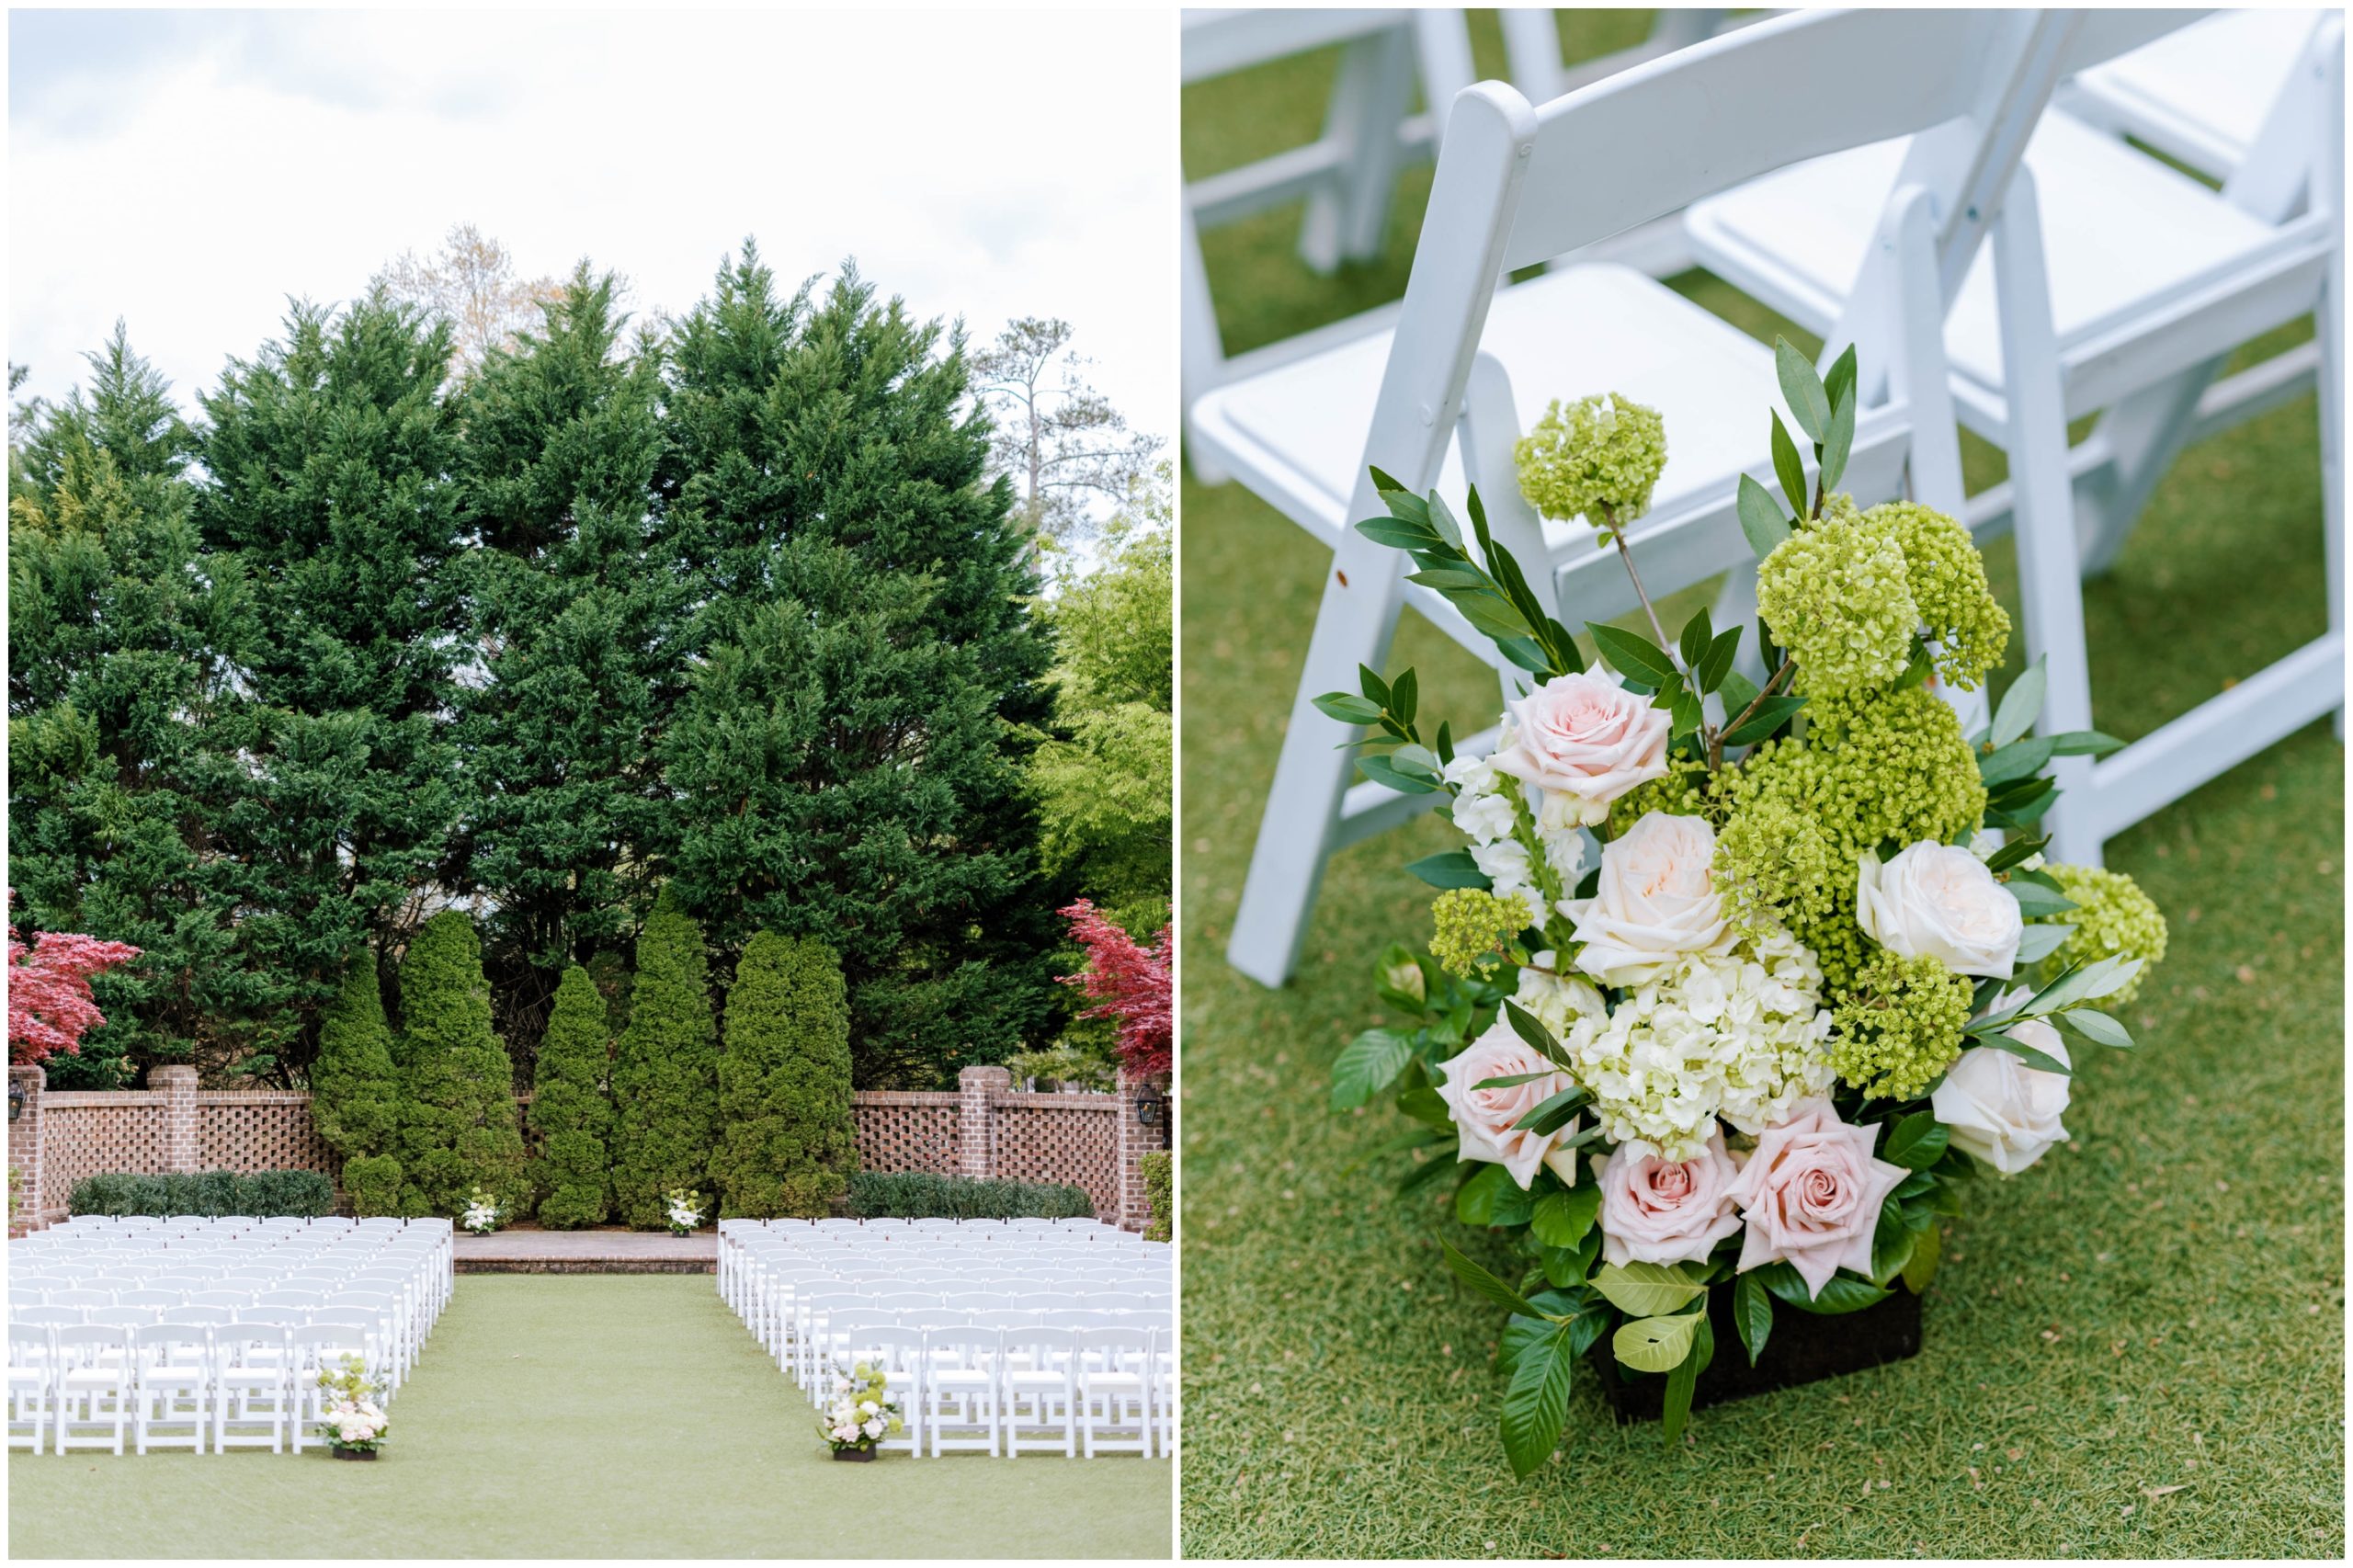 White chairs and blush and ivory florals for a spring outdoor wedding ceremony